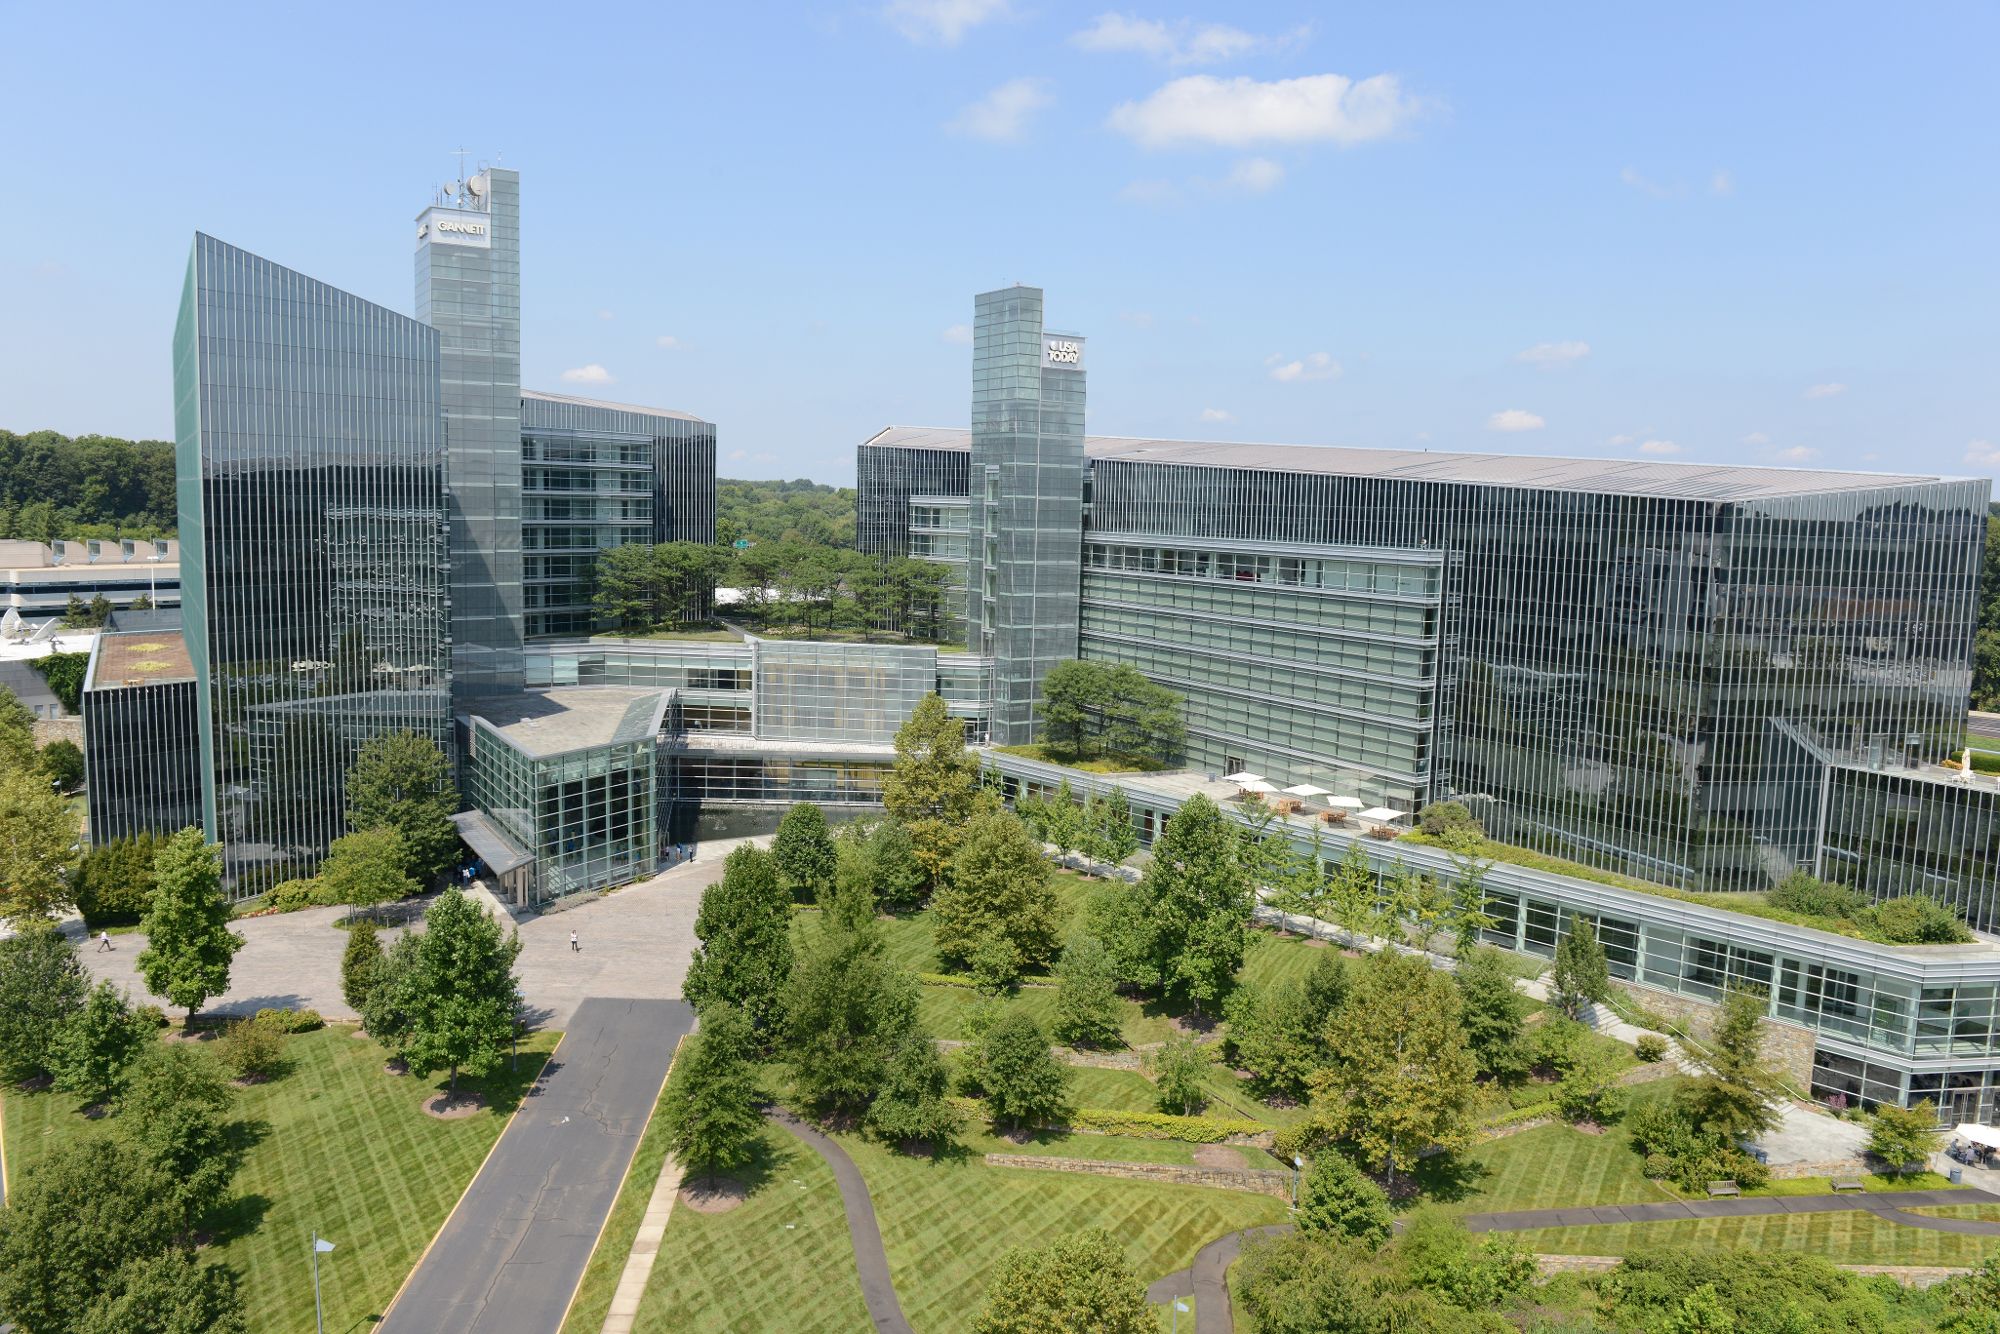 gannett-and-usa-today-headquarters-in-mclean-virginia.